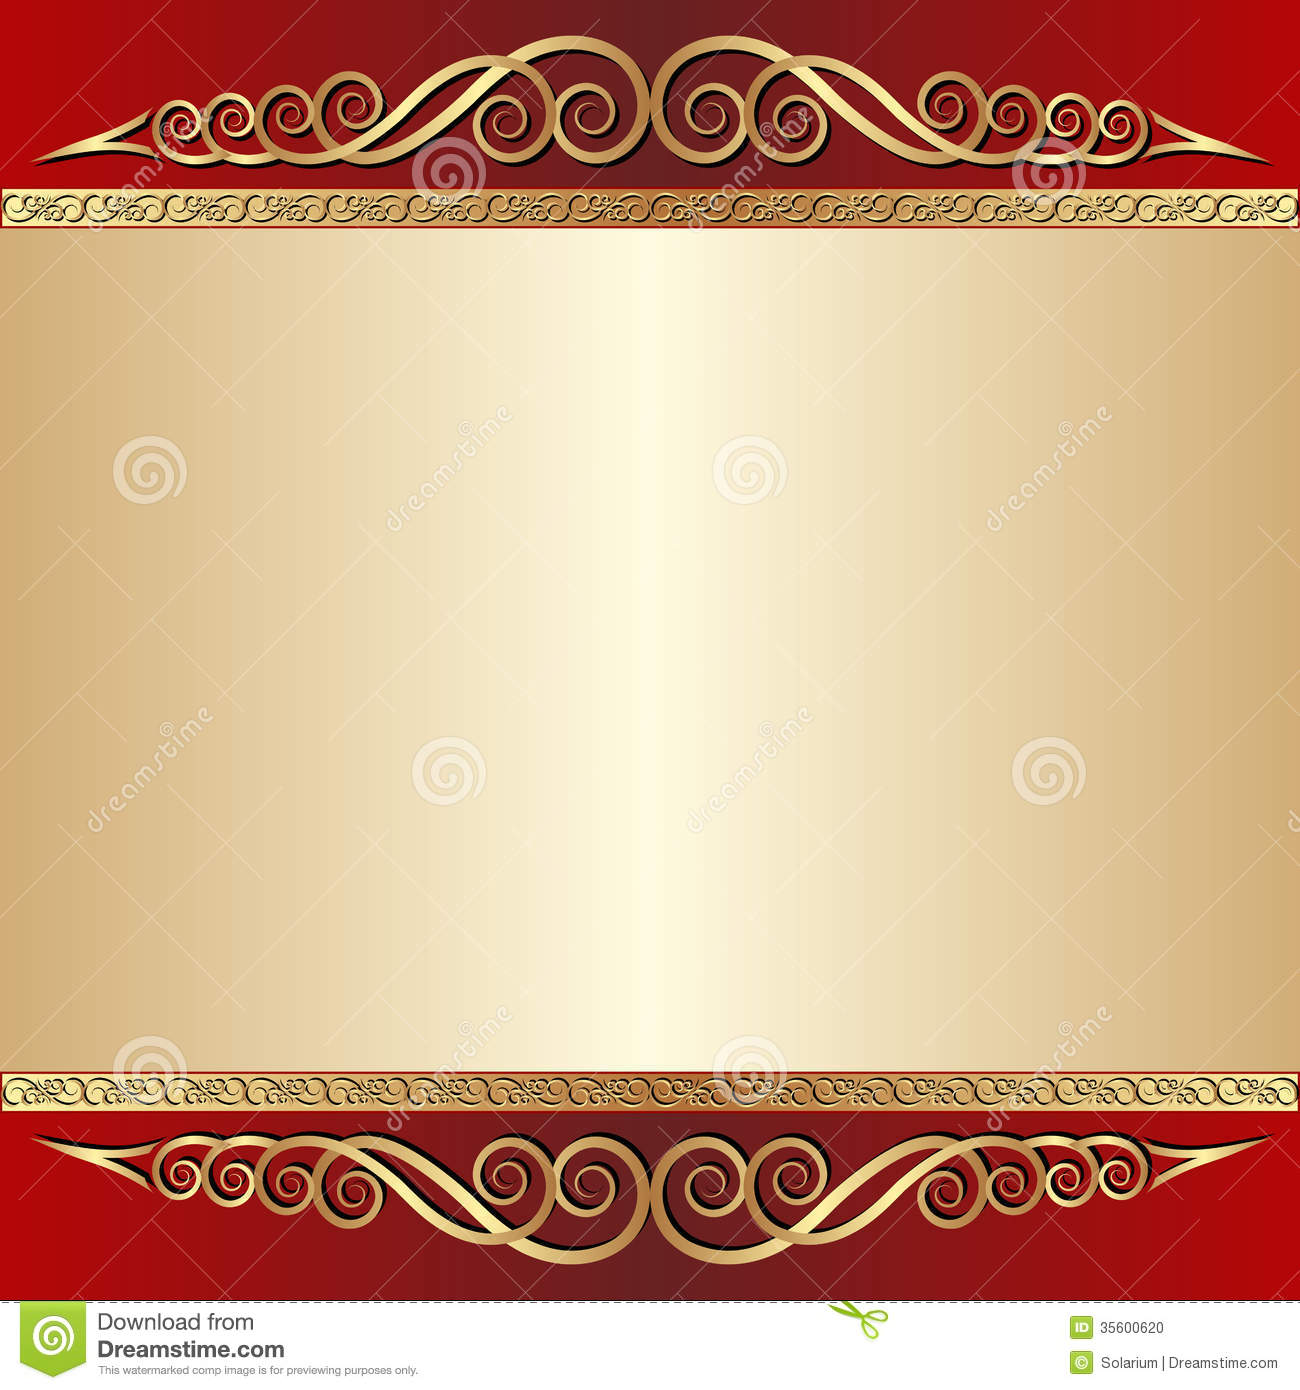 Maroon And Gold Border Background